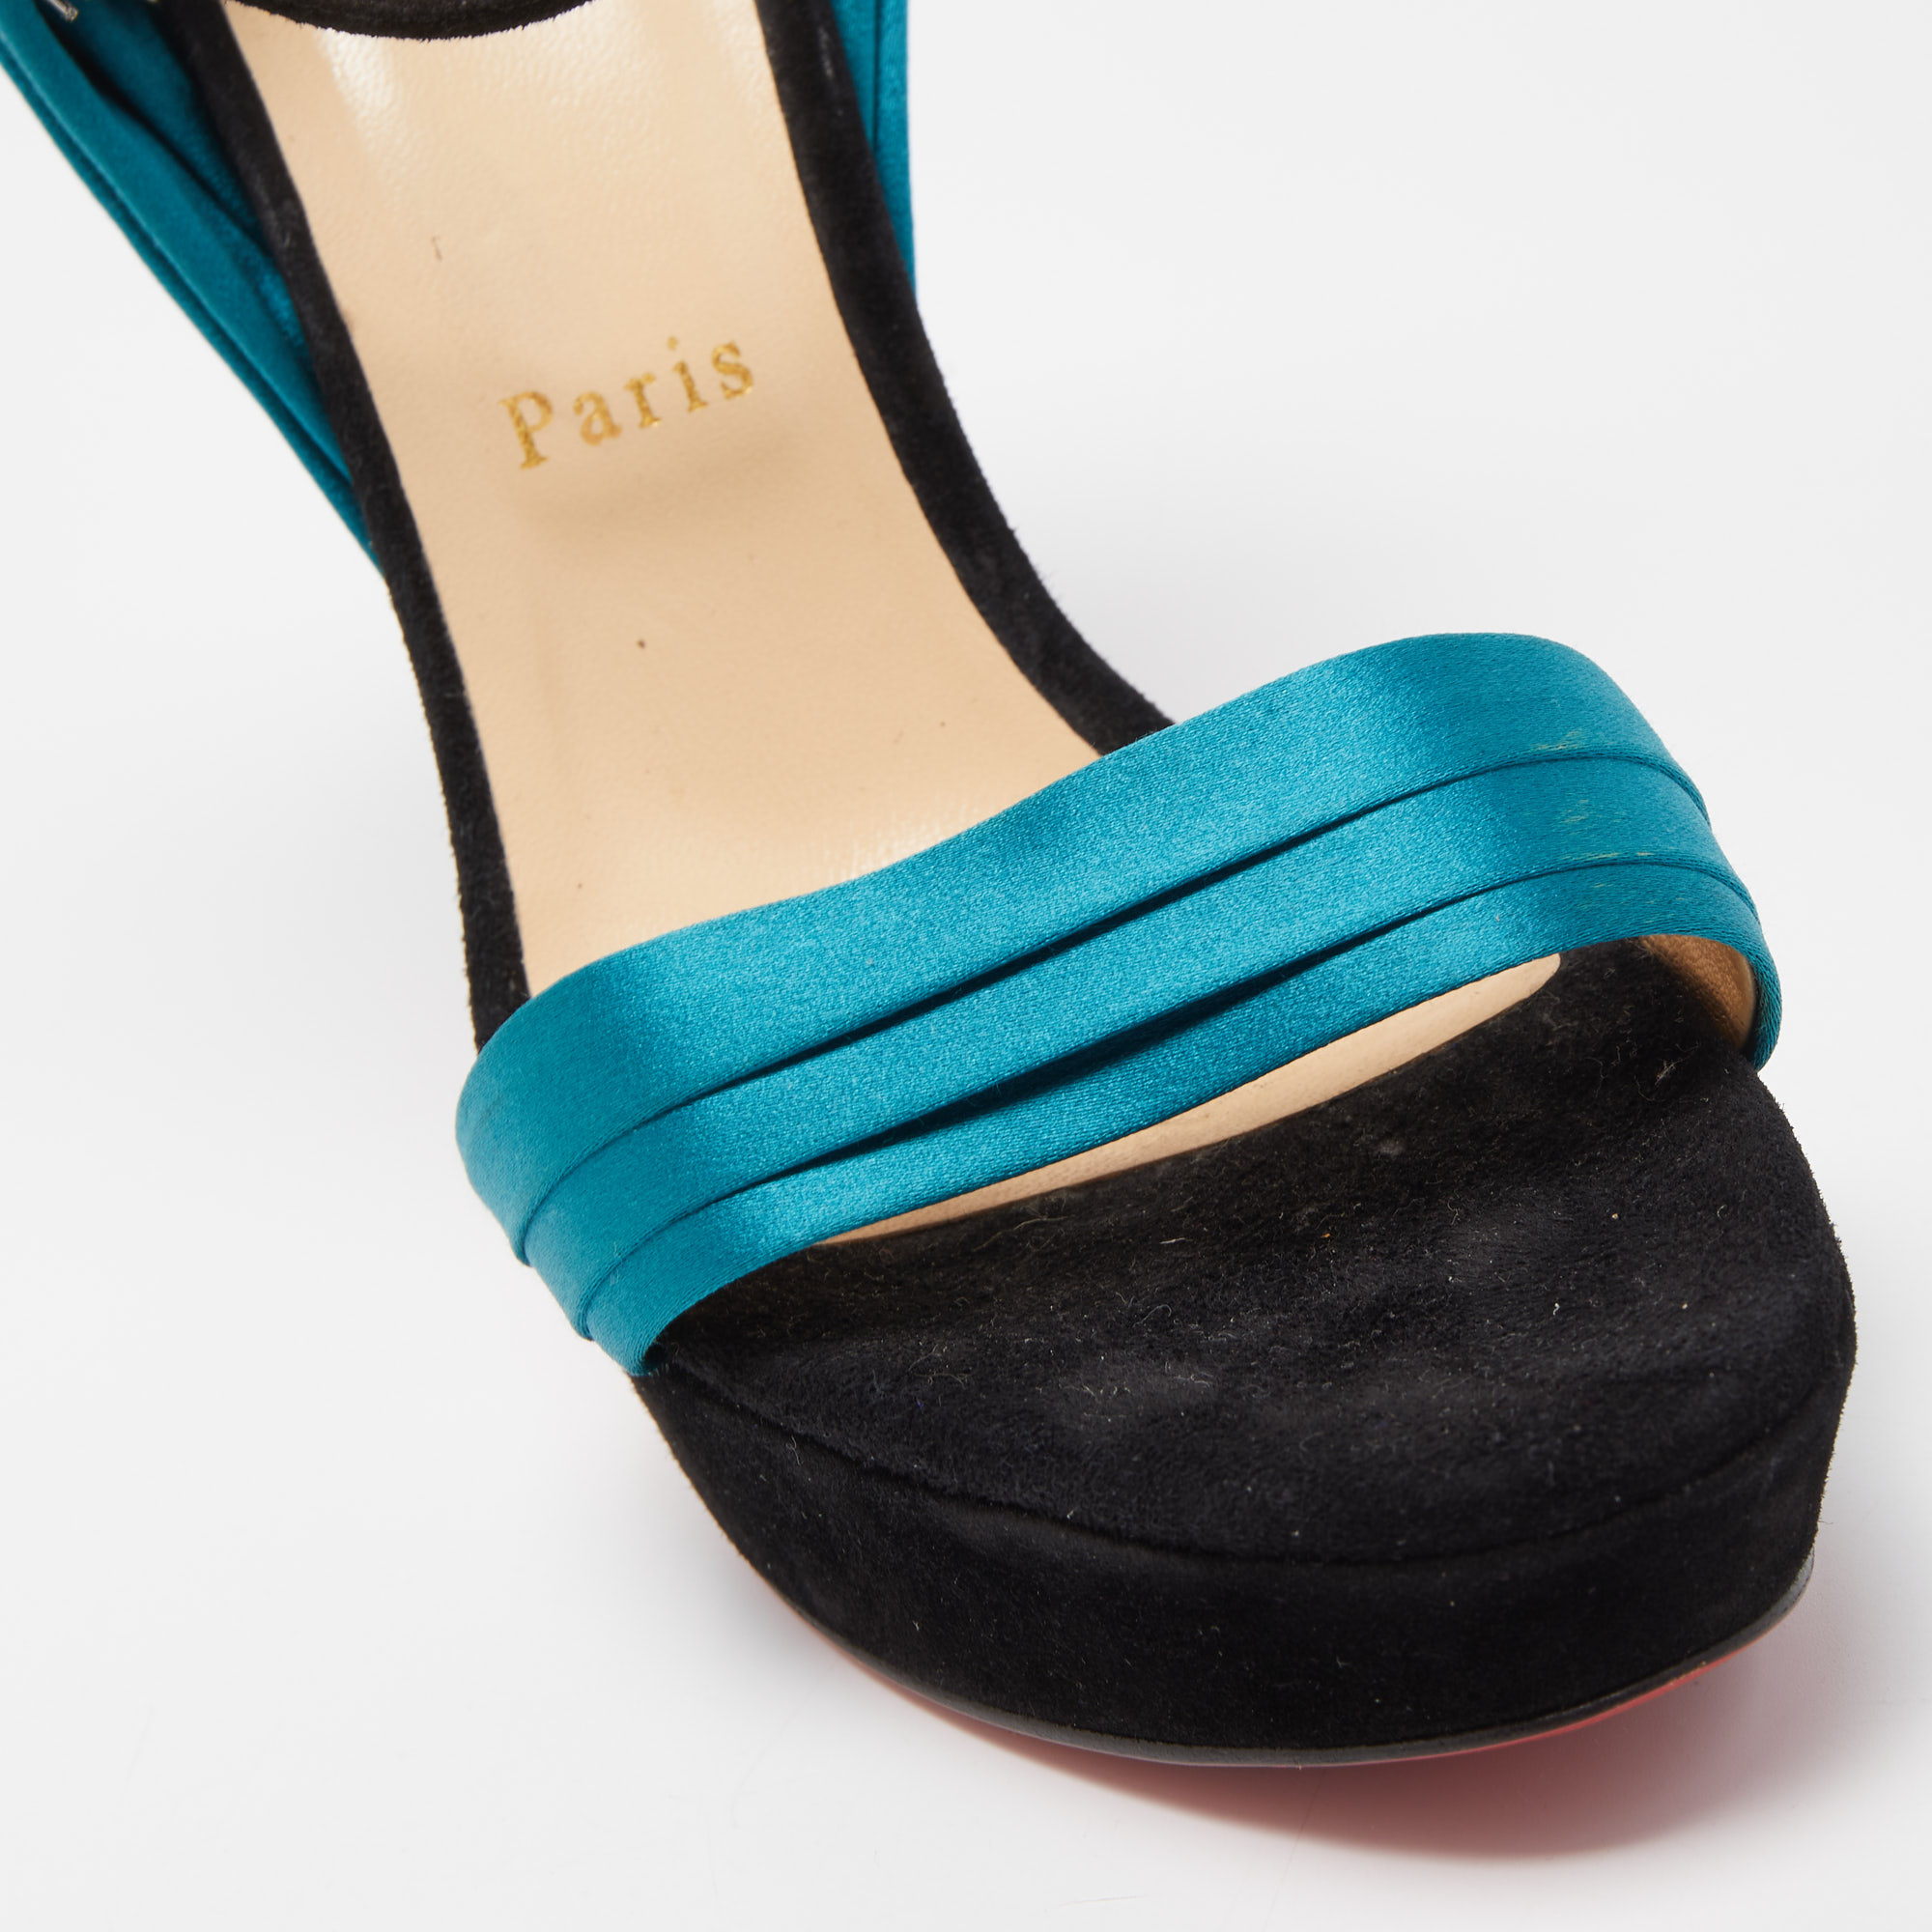 Christian Louboutin Teal/Black Satin And Suede Vampanodo Sandals Size 40.5